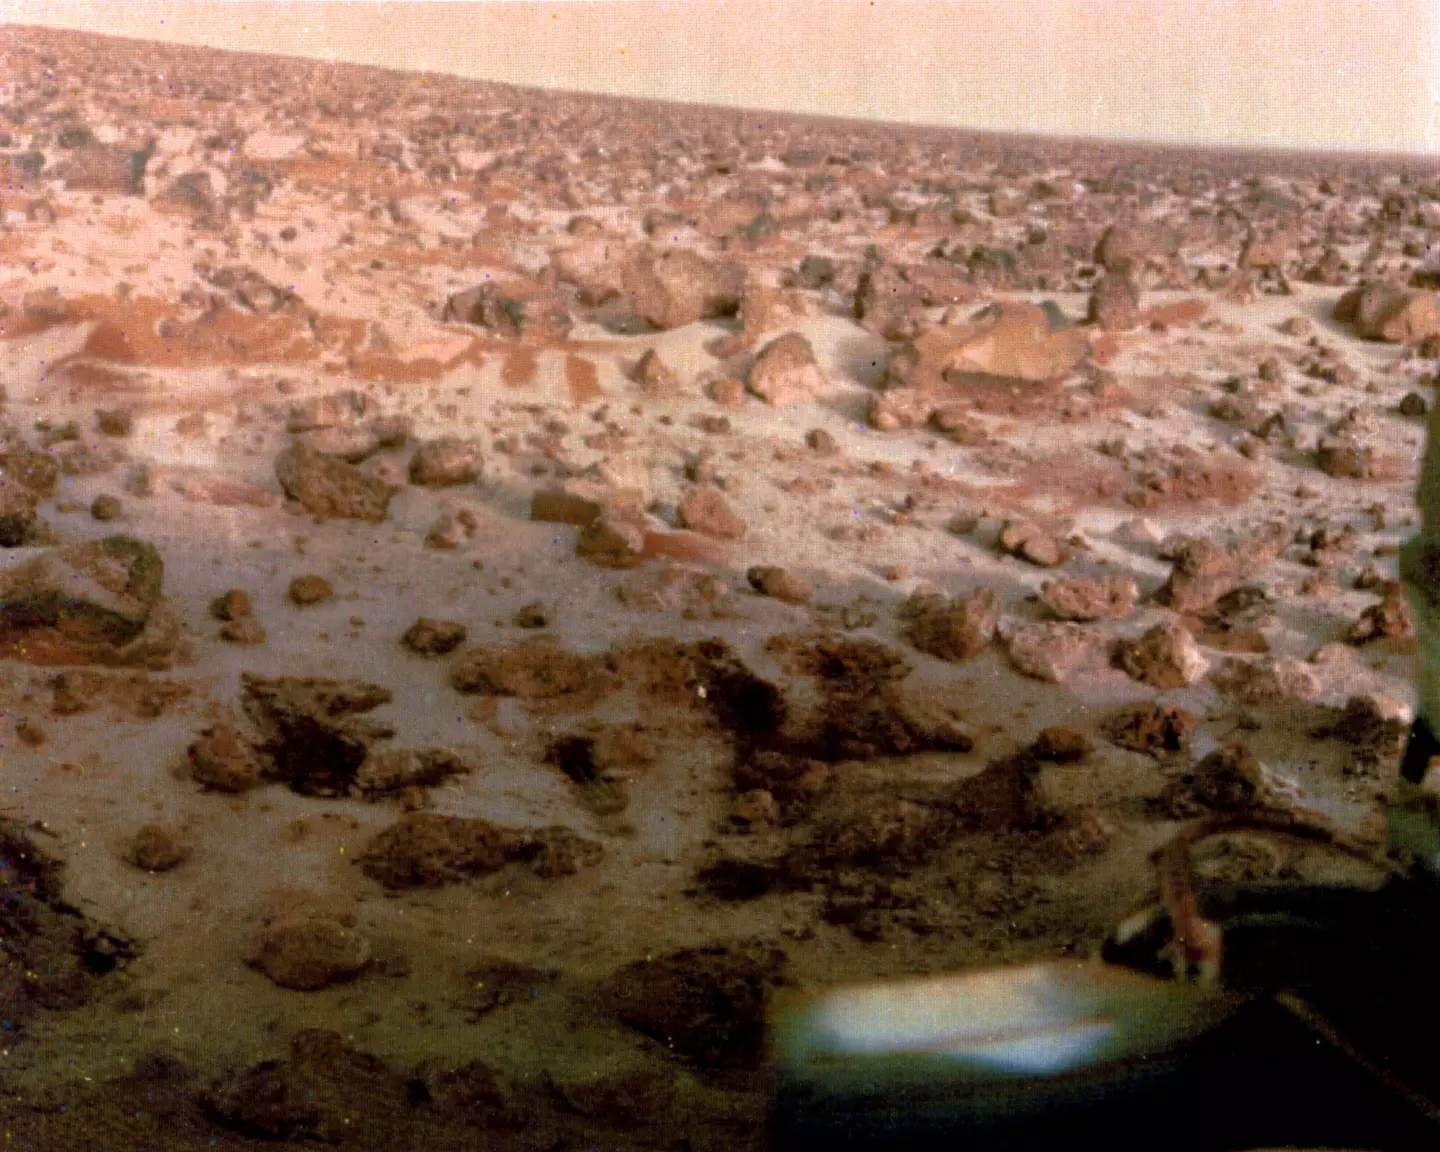 The surface of Mars, looks very homey!